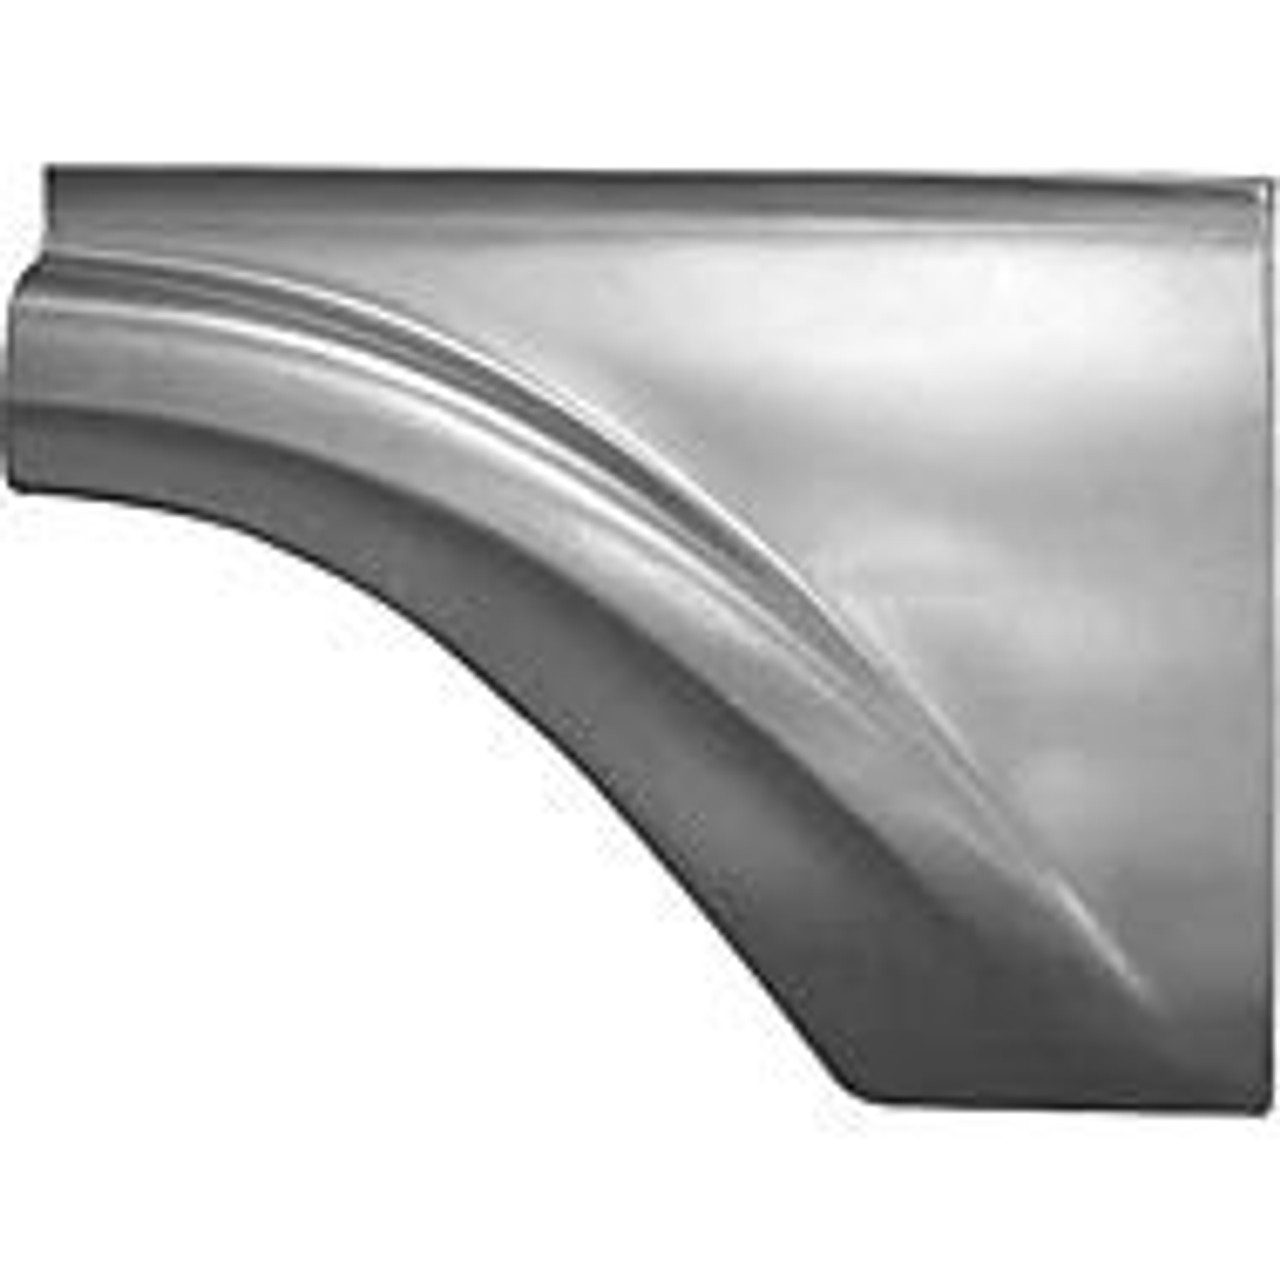 LH / 1961-66 FORD PICKUP FRONT FENDER-REAR SECTION